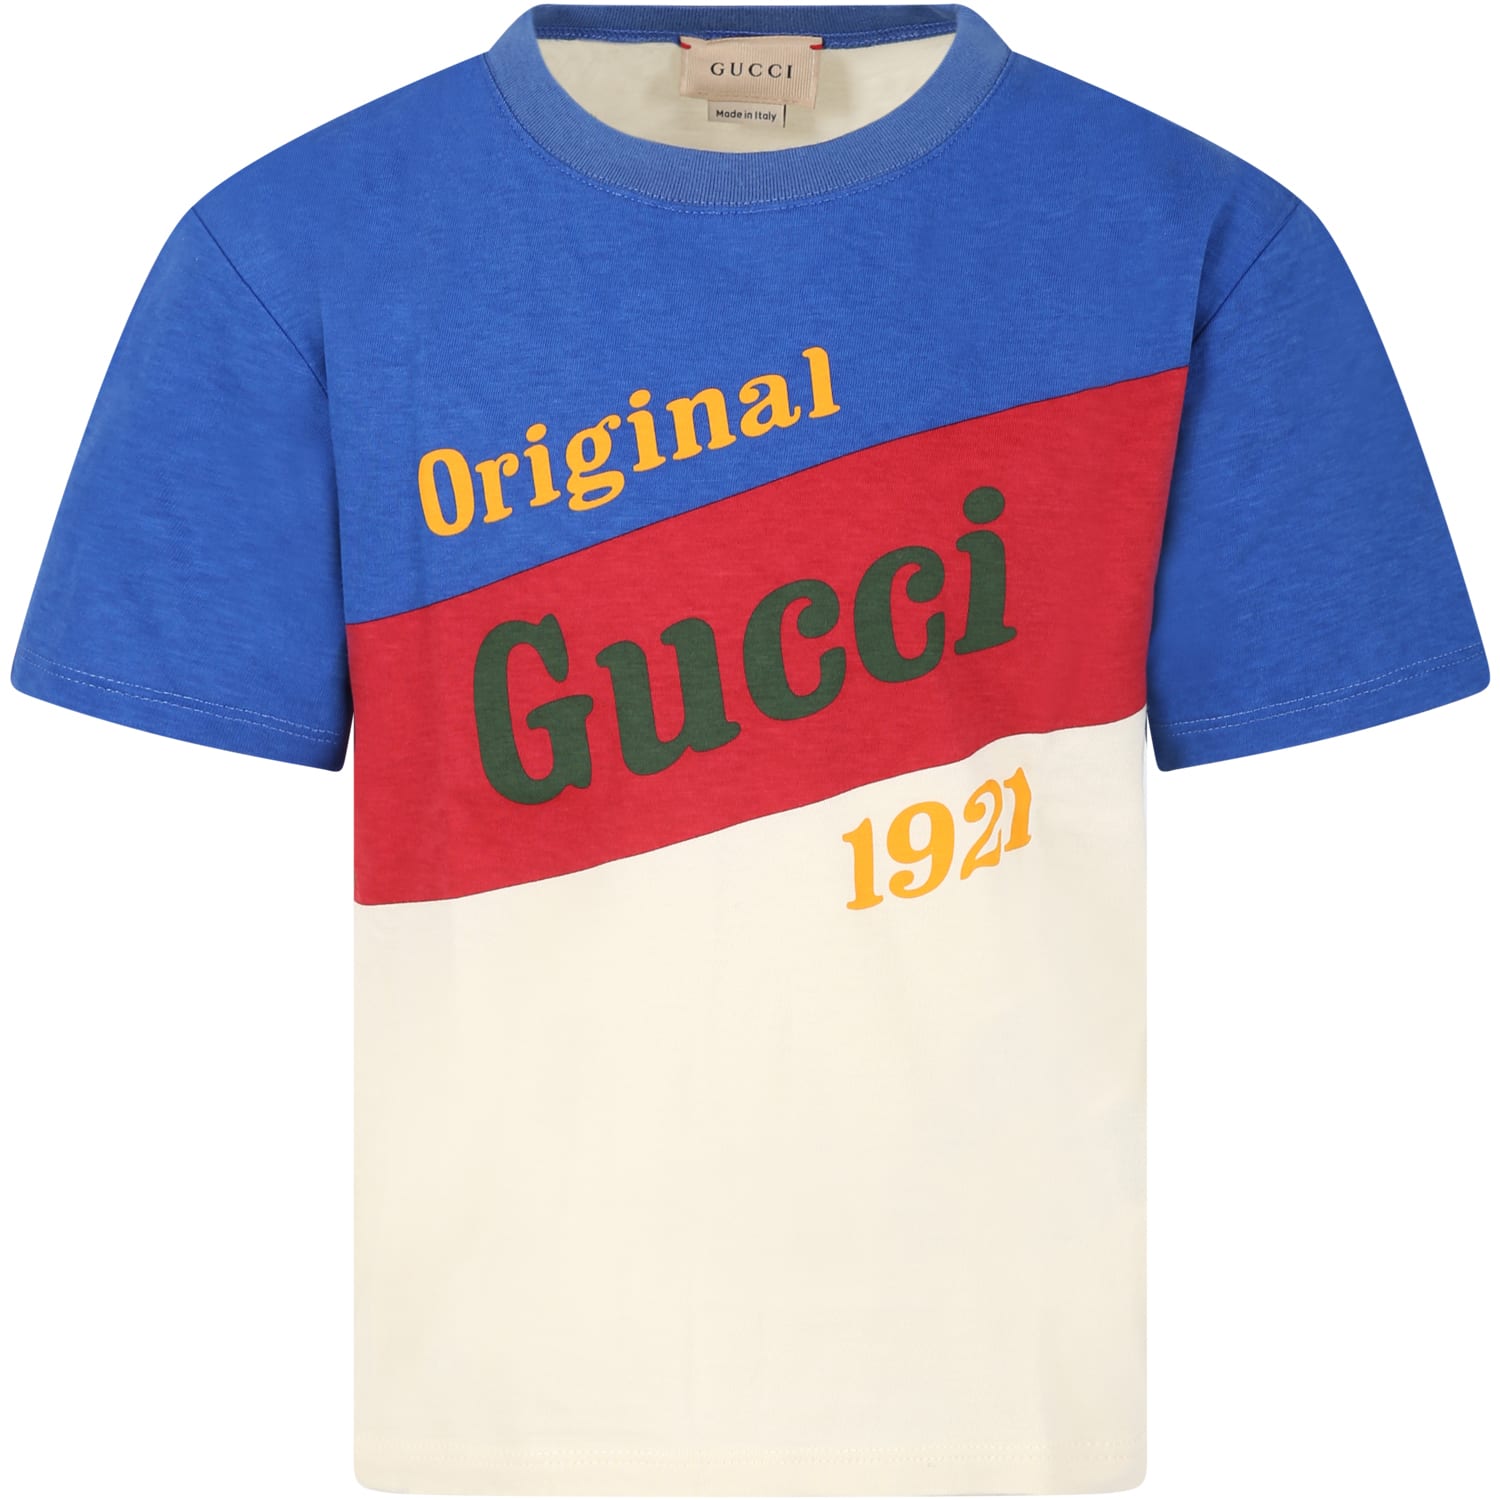 GUCCI MULTICOLOR T-SHIRT FOR BOY WITH ORIGINAL GUCCI 1921 WRITING